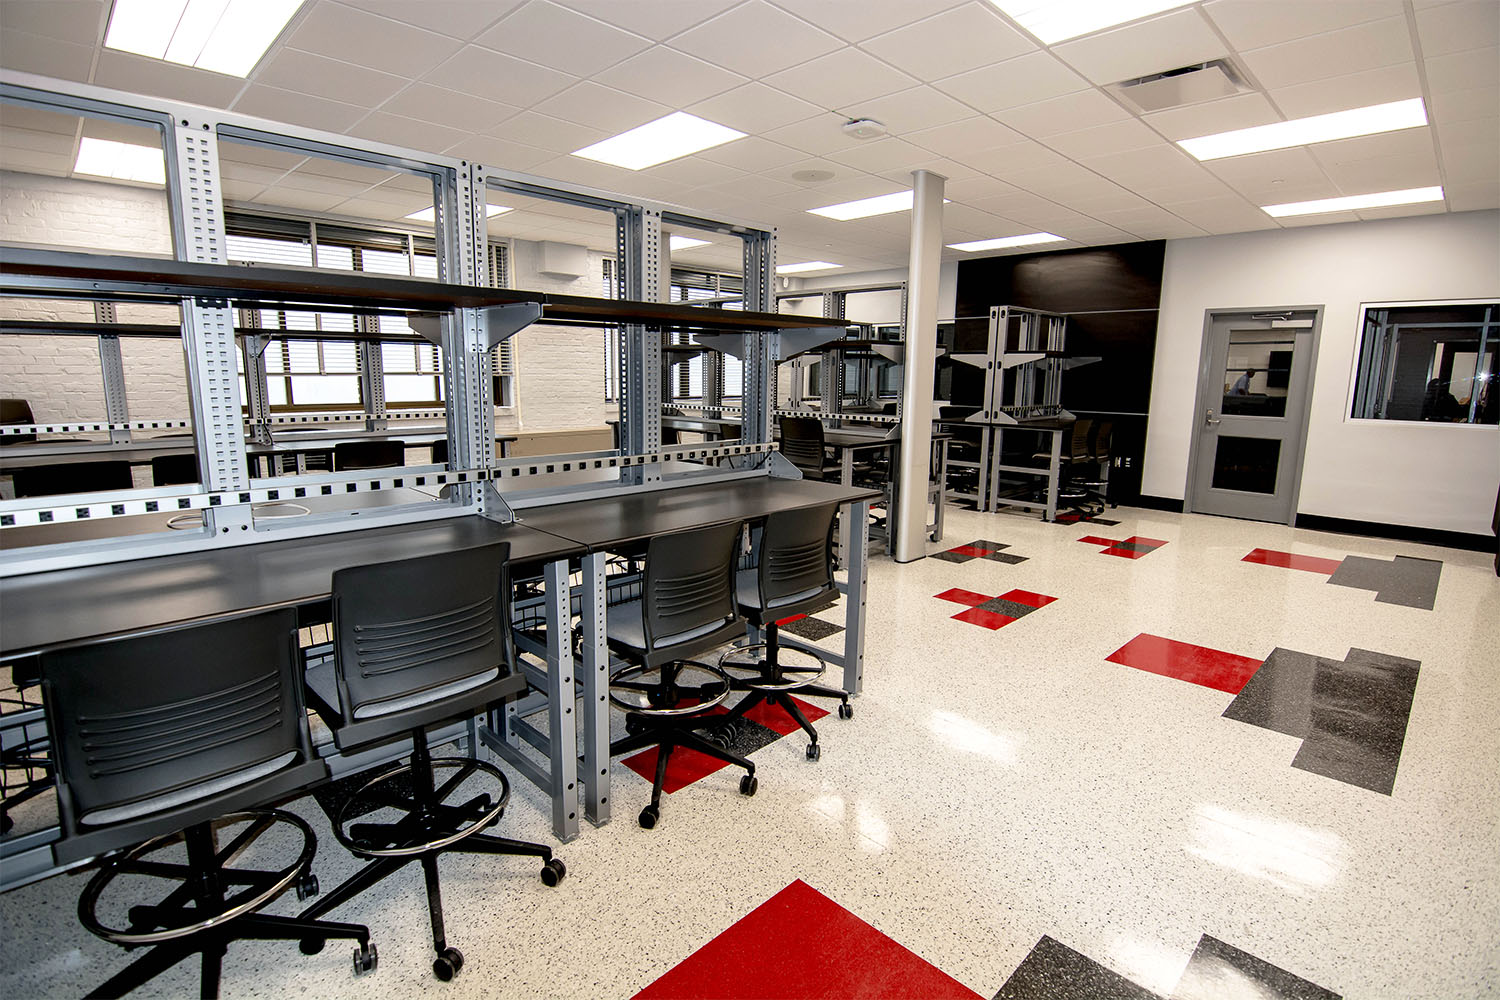 Andrew Jackson High cyber security lab with desks